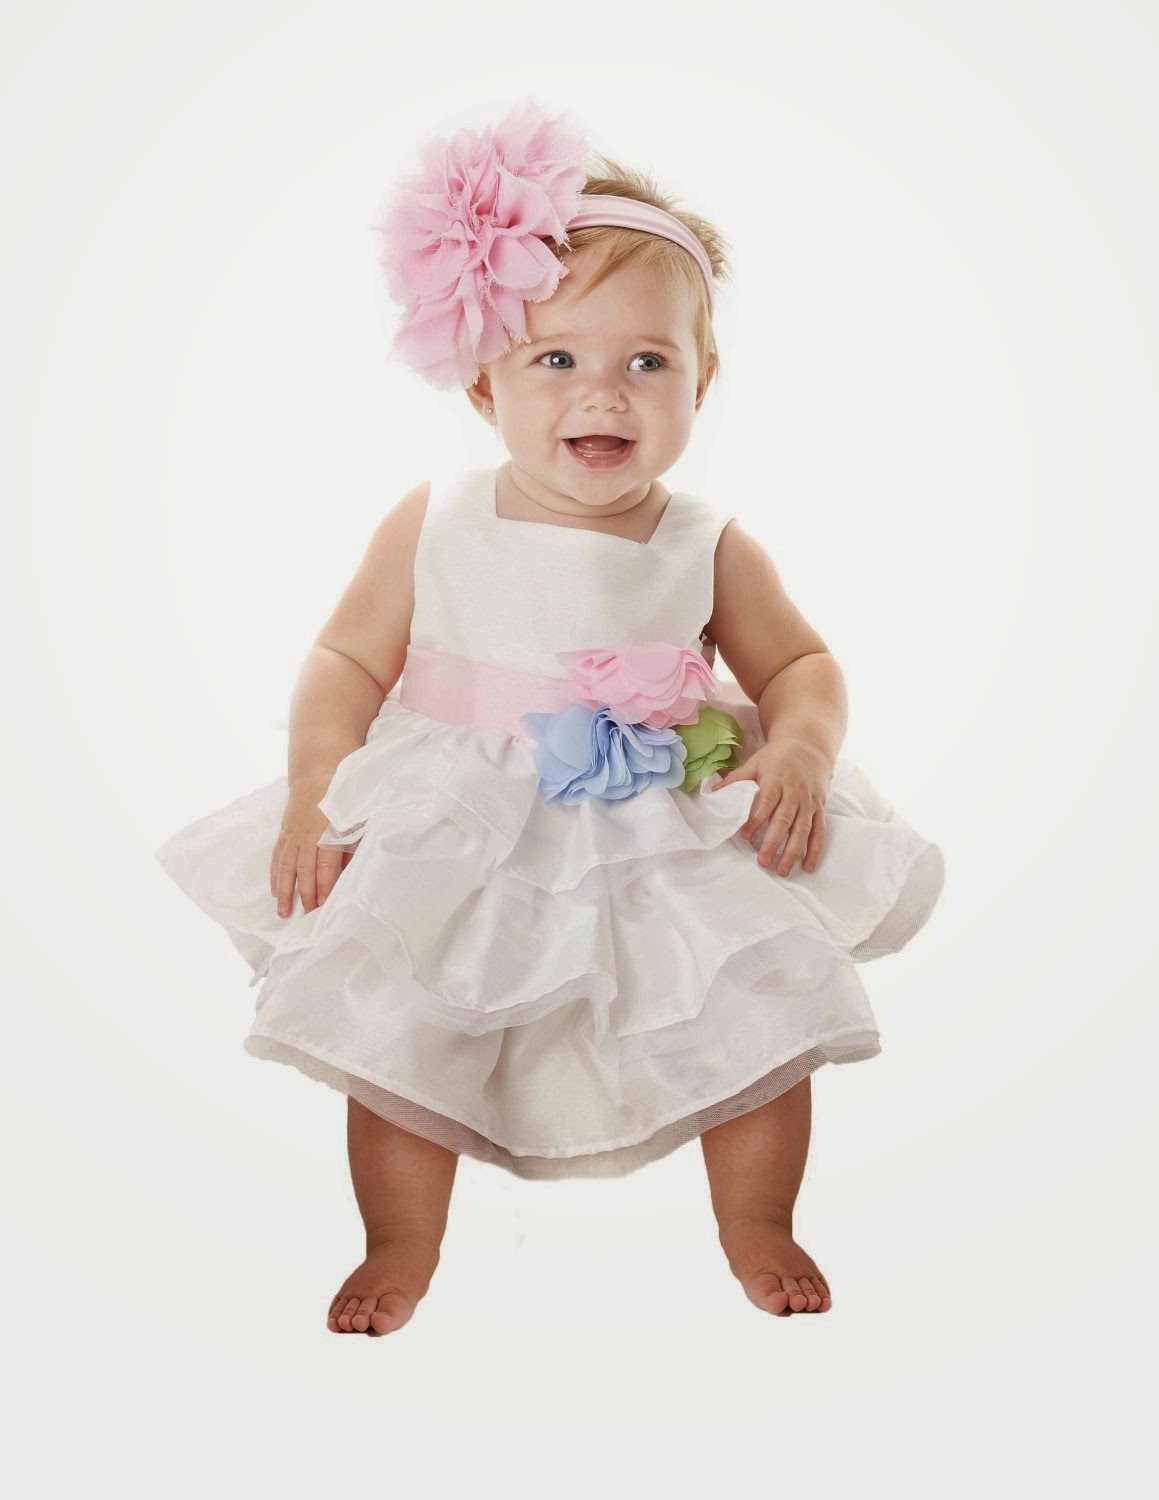 Cute Dresses For 1 Year Old Baby Girl - Where To Find In 2017